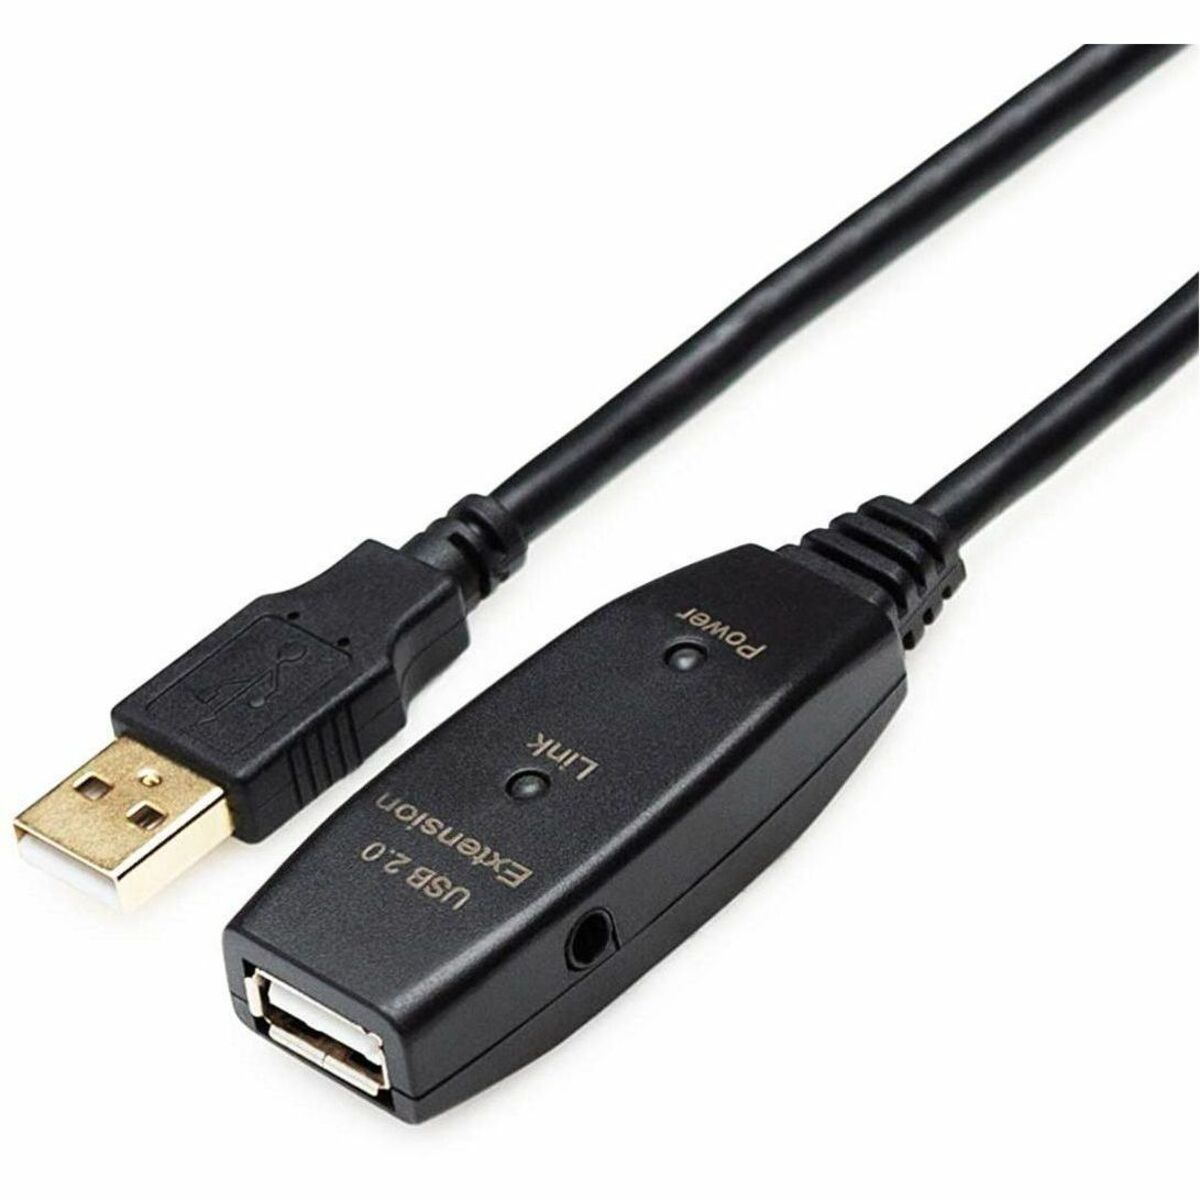 4XEM 4X3202A130M 30M USB 2.0 Active Extension Cable, Plug & Play, Signal Booster, Triple Shielded